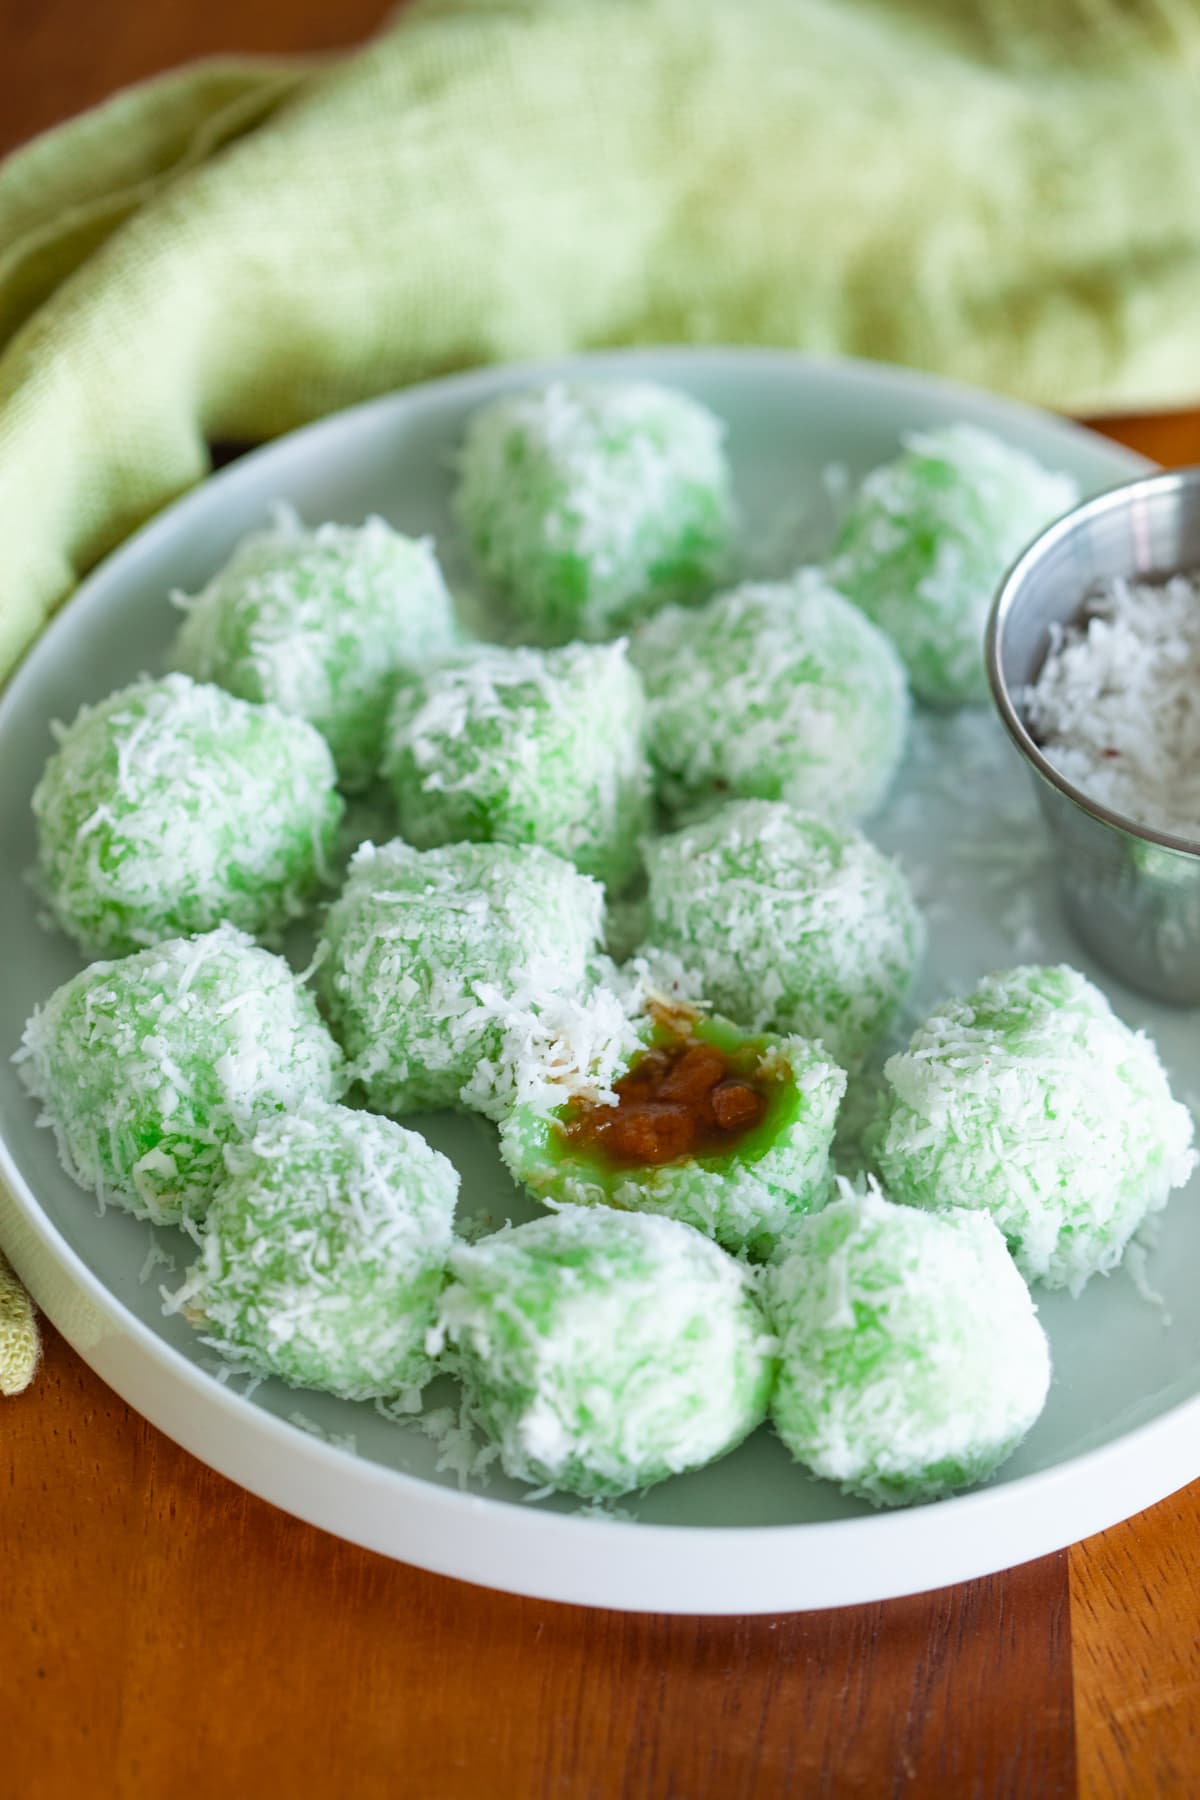 Onde-onde rolled in with some fresh grated coconut.